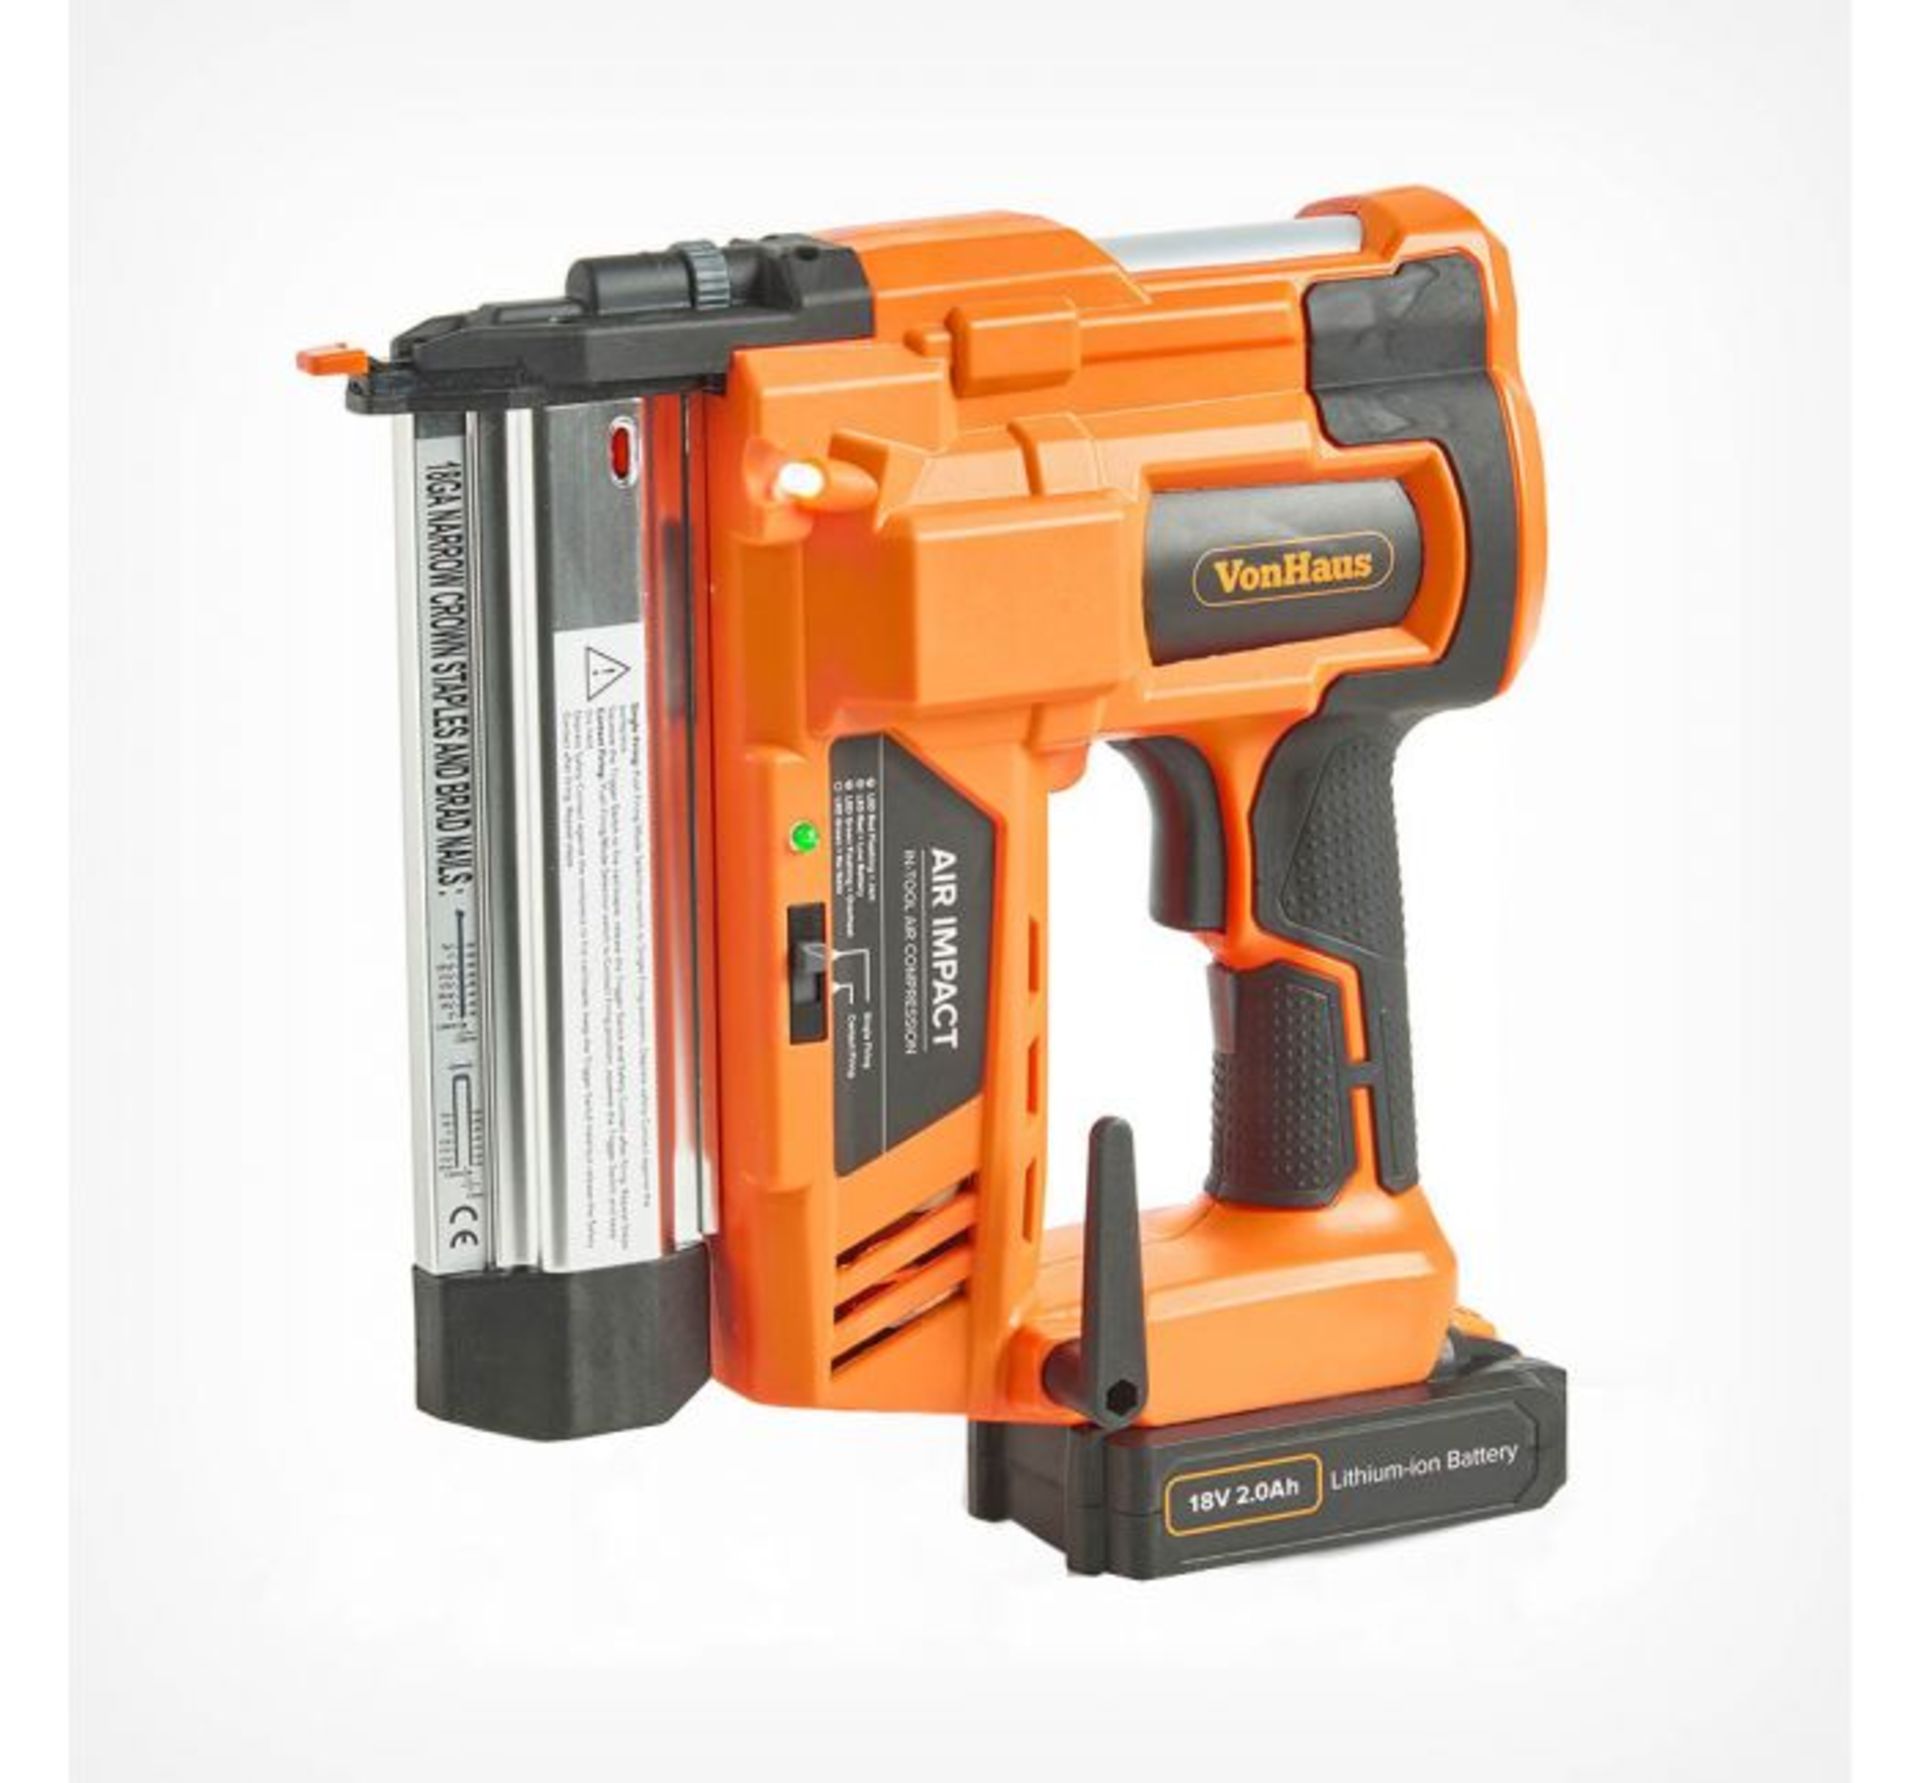 (GE48) Cordless Nail & Staple Gun Features smooth action trigger switch, two firing modes, dep...